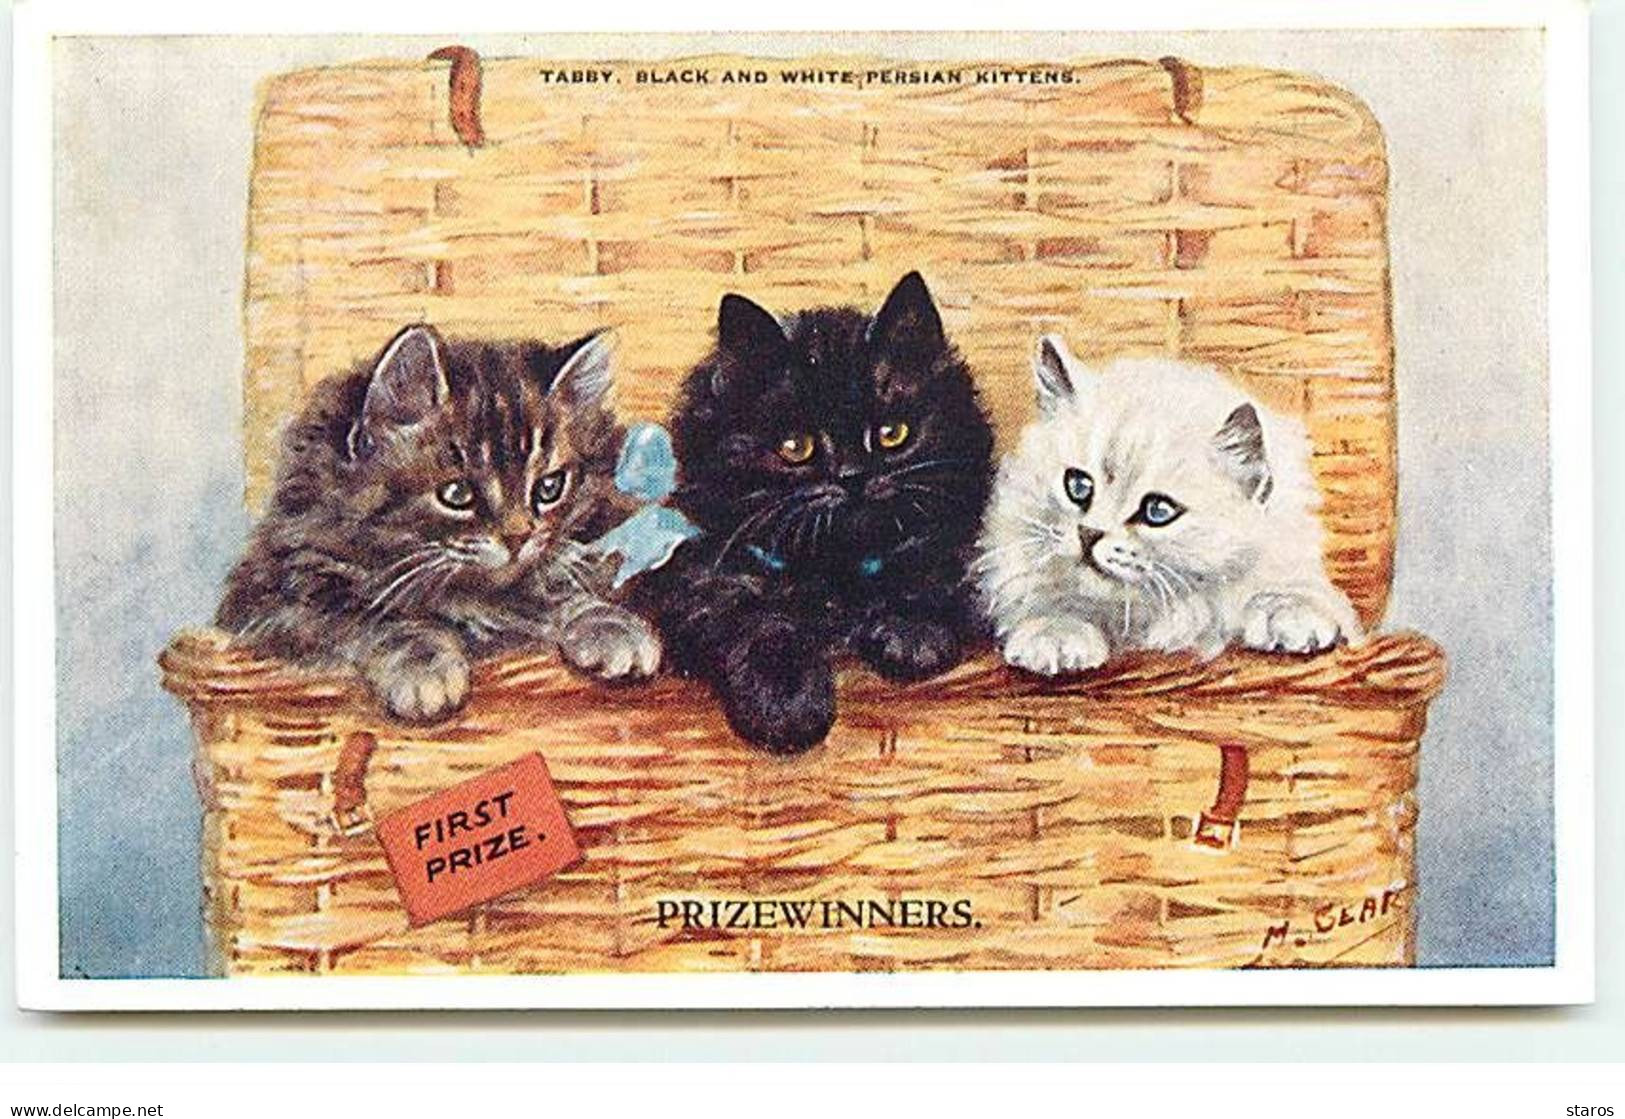 Animaux - Chat - M. Gear - Prizewinners - Tabby, Black And White Persian Kittens - Chats